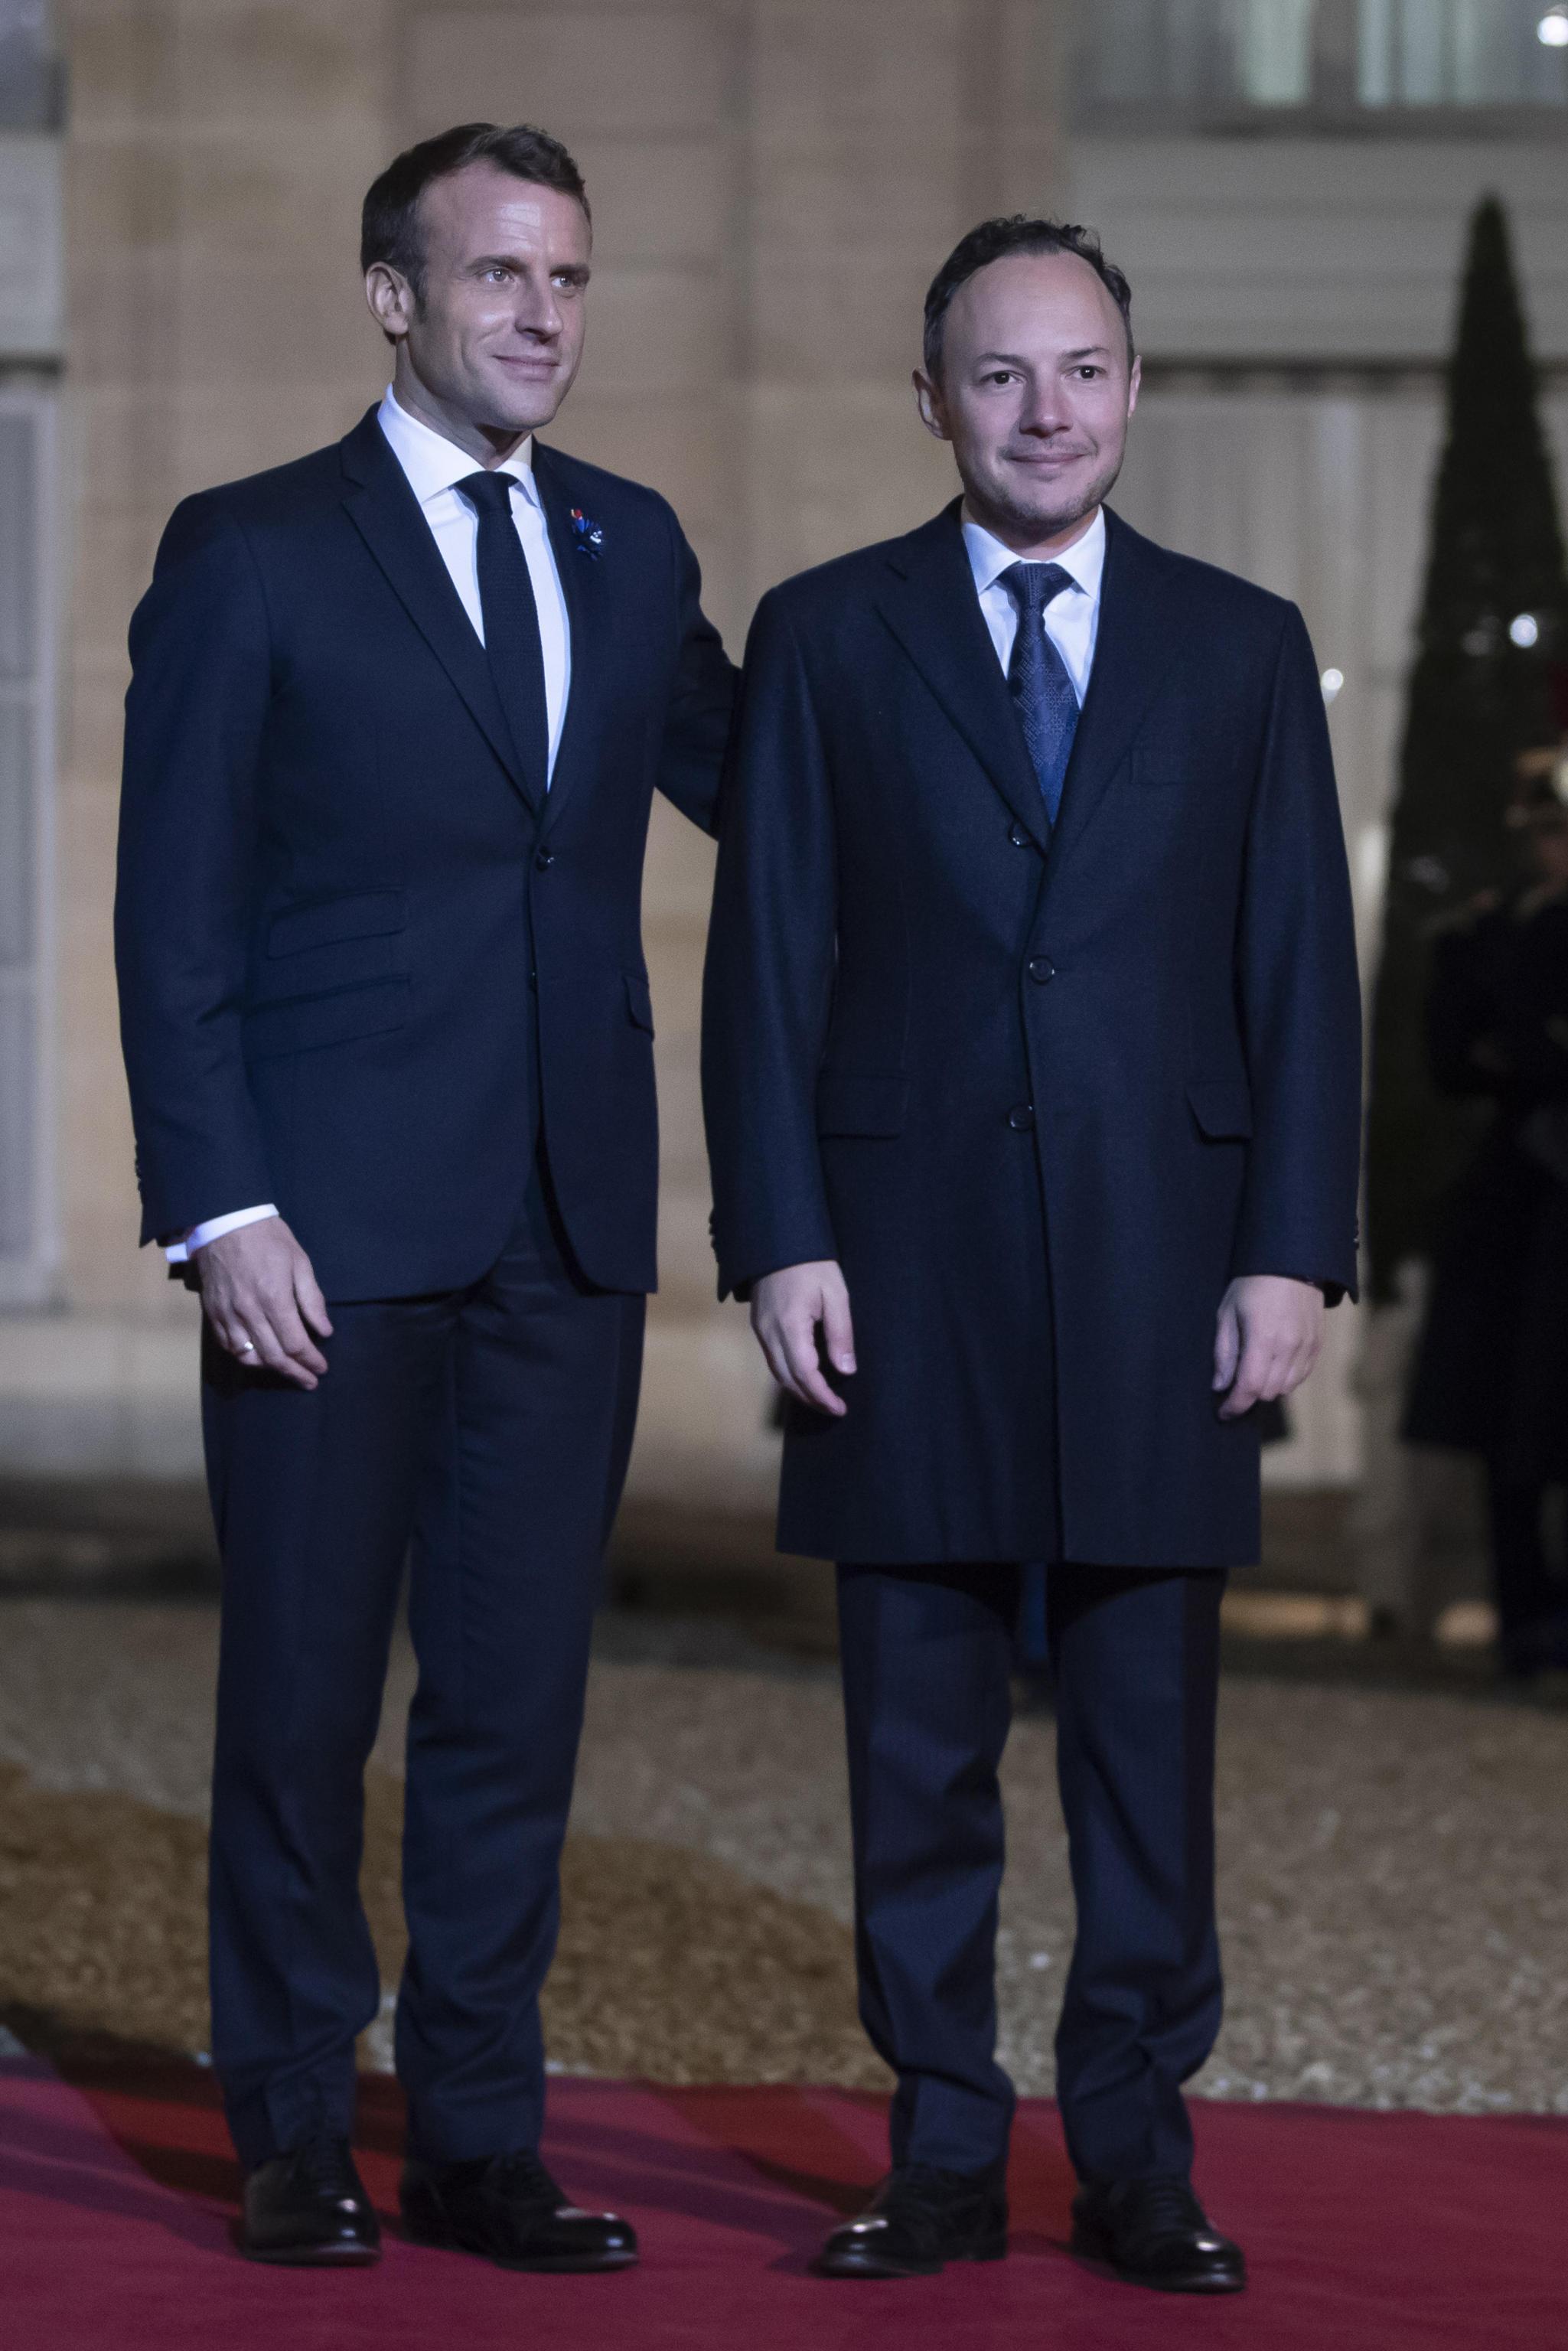 epa07989919 French President Emmanuel Macron (L) welcomes Andorra's Prime Minister Xavier Espot Zamora (R) for a dinner held with participants of the Paris Peace Forum, at the Elysee Palace in Paris, France, 11 November 2019 (issued 12 November 2019).  EPA/CHRISTOPHE PETIT TESSON